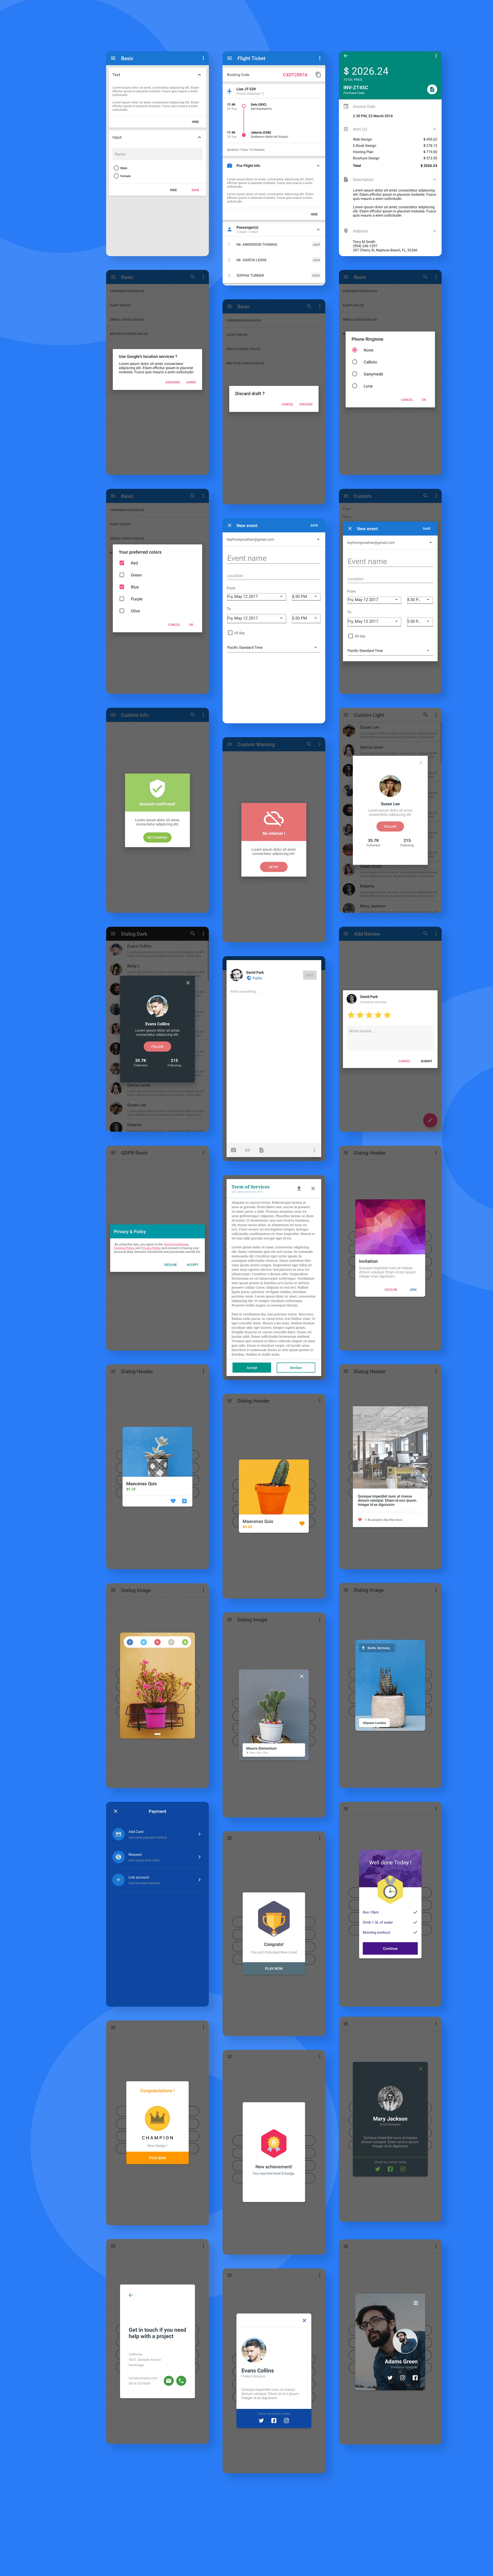 MaterialX - Android Material Design UI Components 2.7 - 14